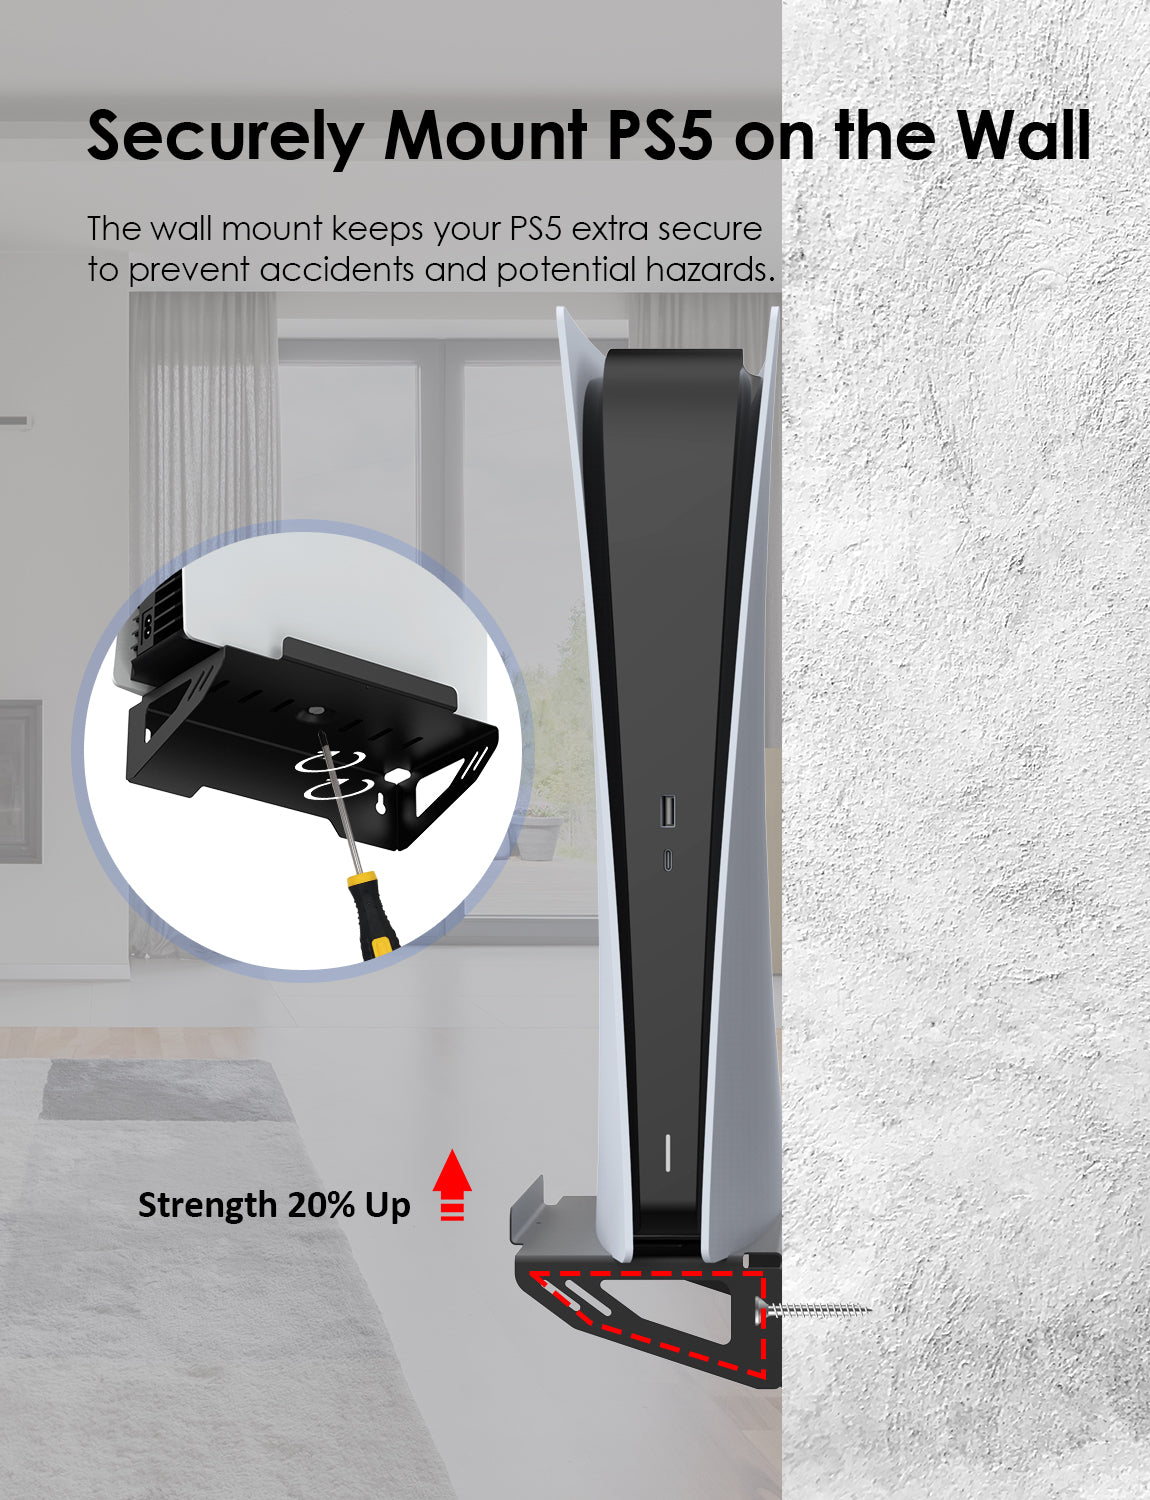 Securely attach the console to the wall mount to prevent accidents and potential hazards.